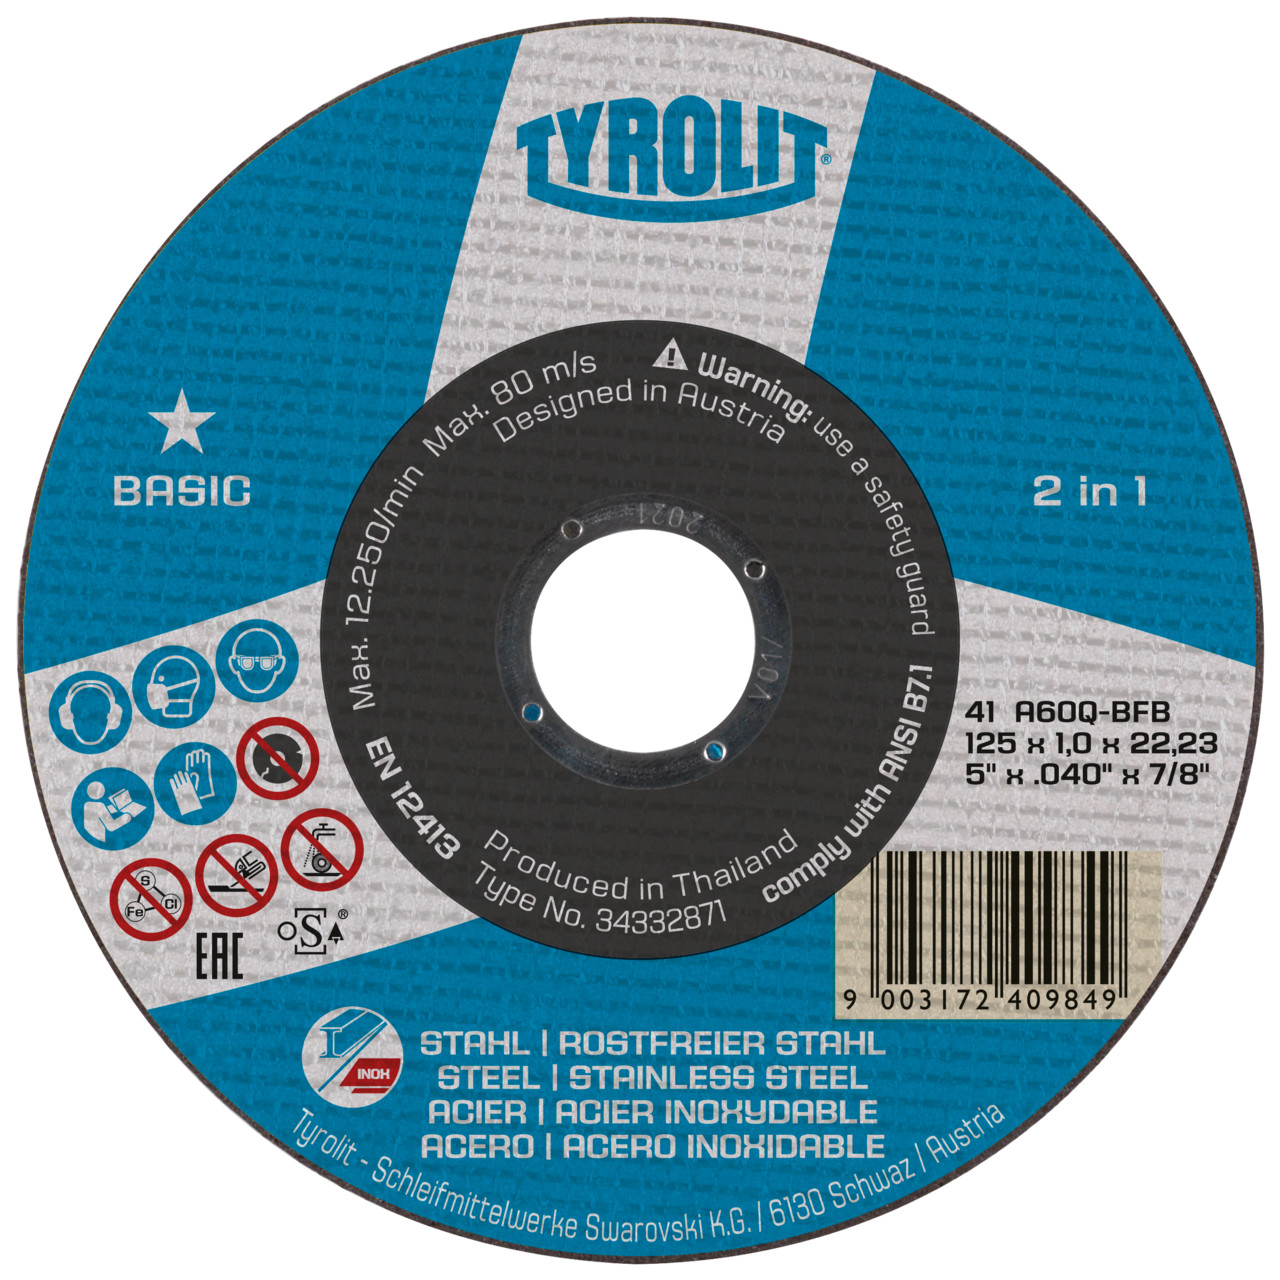 Tyrolit Cutting discs DxDxH 115x1.6x22.23 2in1 for steel and stainless steel, shape: 41 - straight version, Art. 34332872